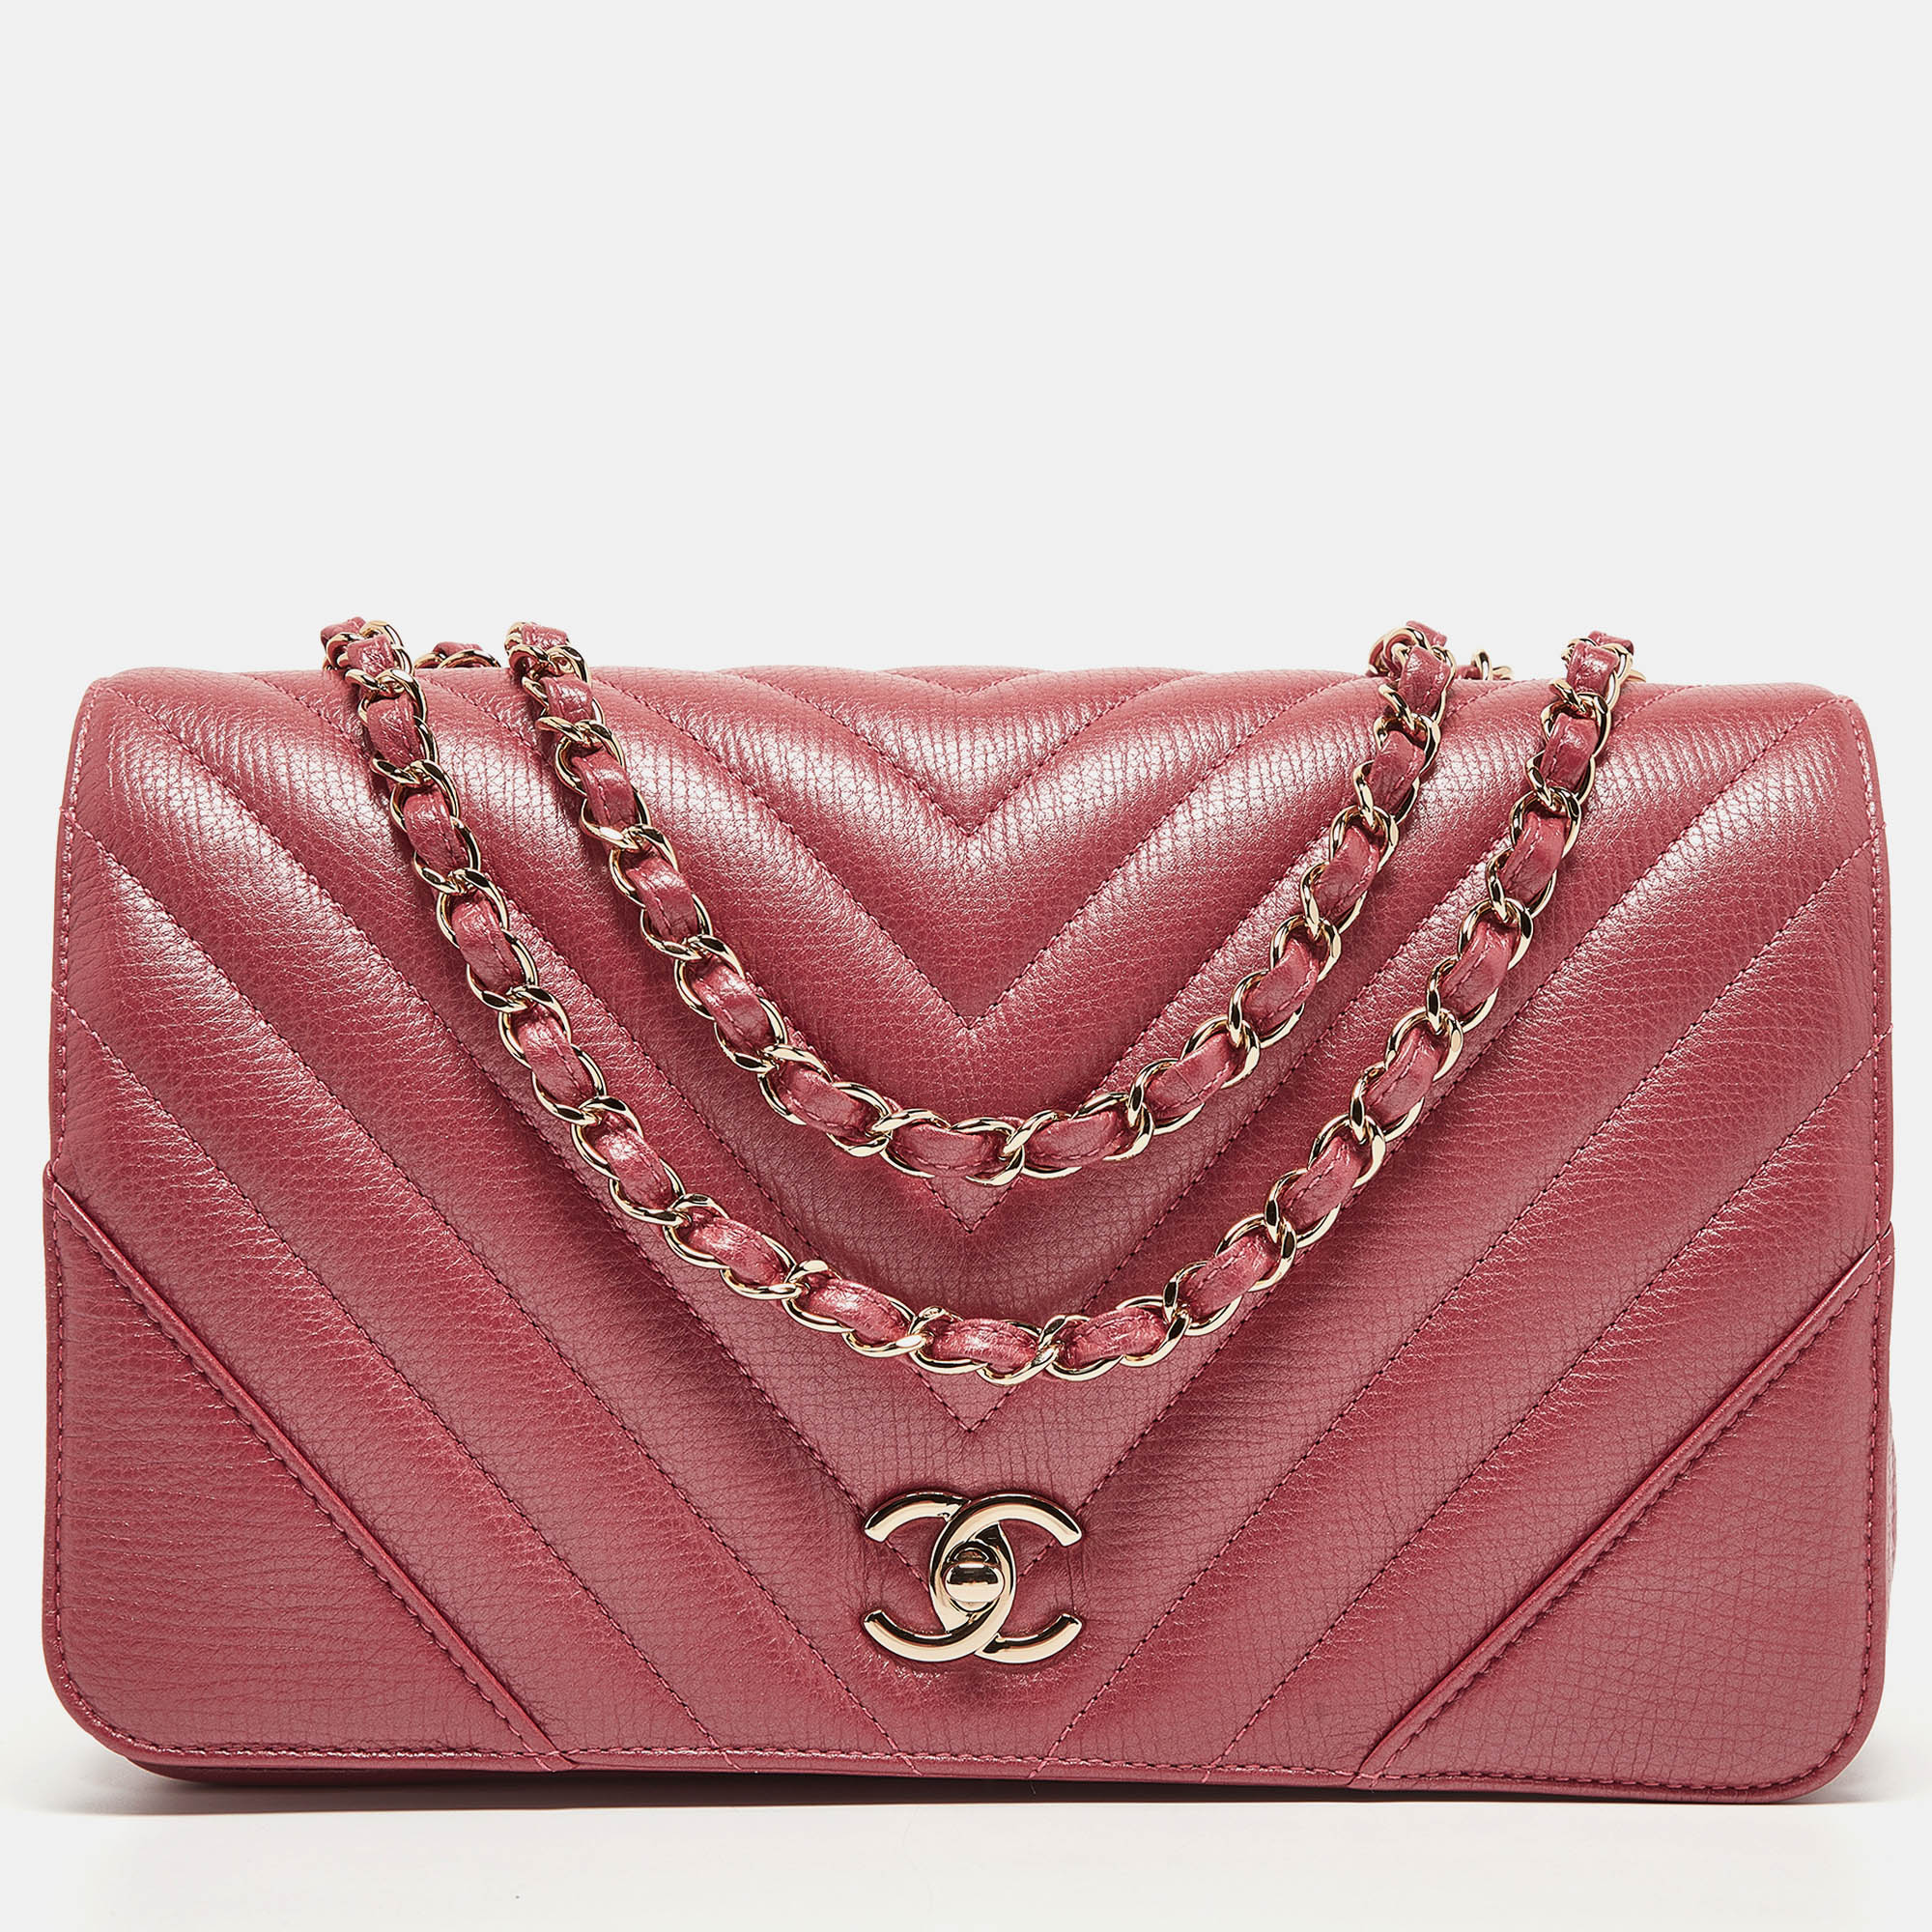 Chanel pink chevron leather large statement flap bag